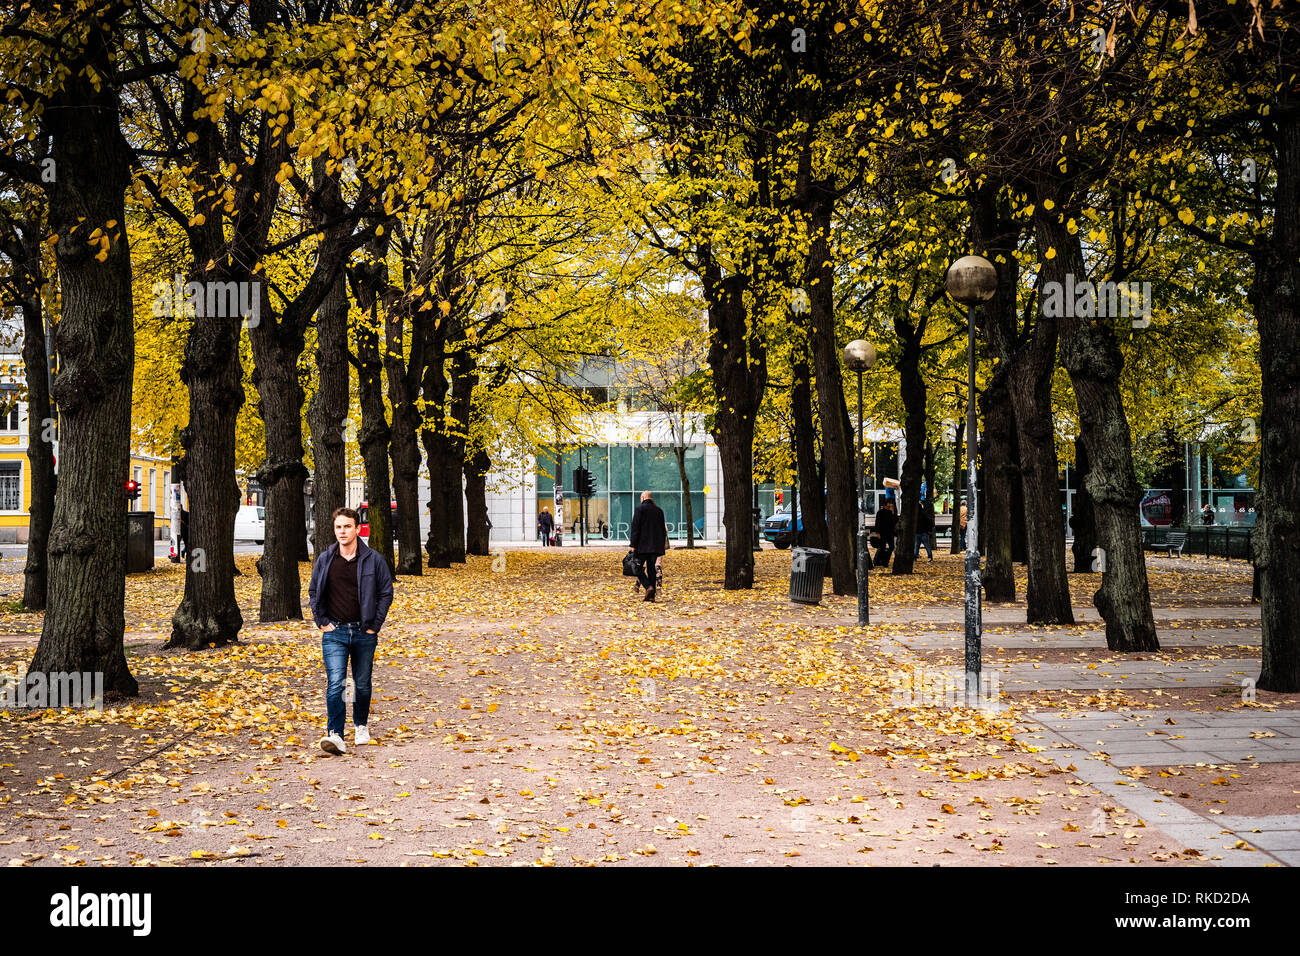 People walking through a small park in central Oslo, Norway, in the autumn fall season Stock Photo